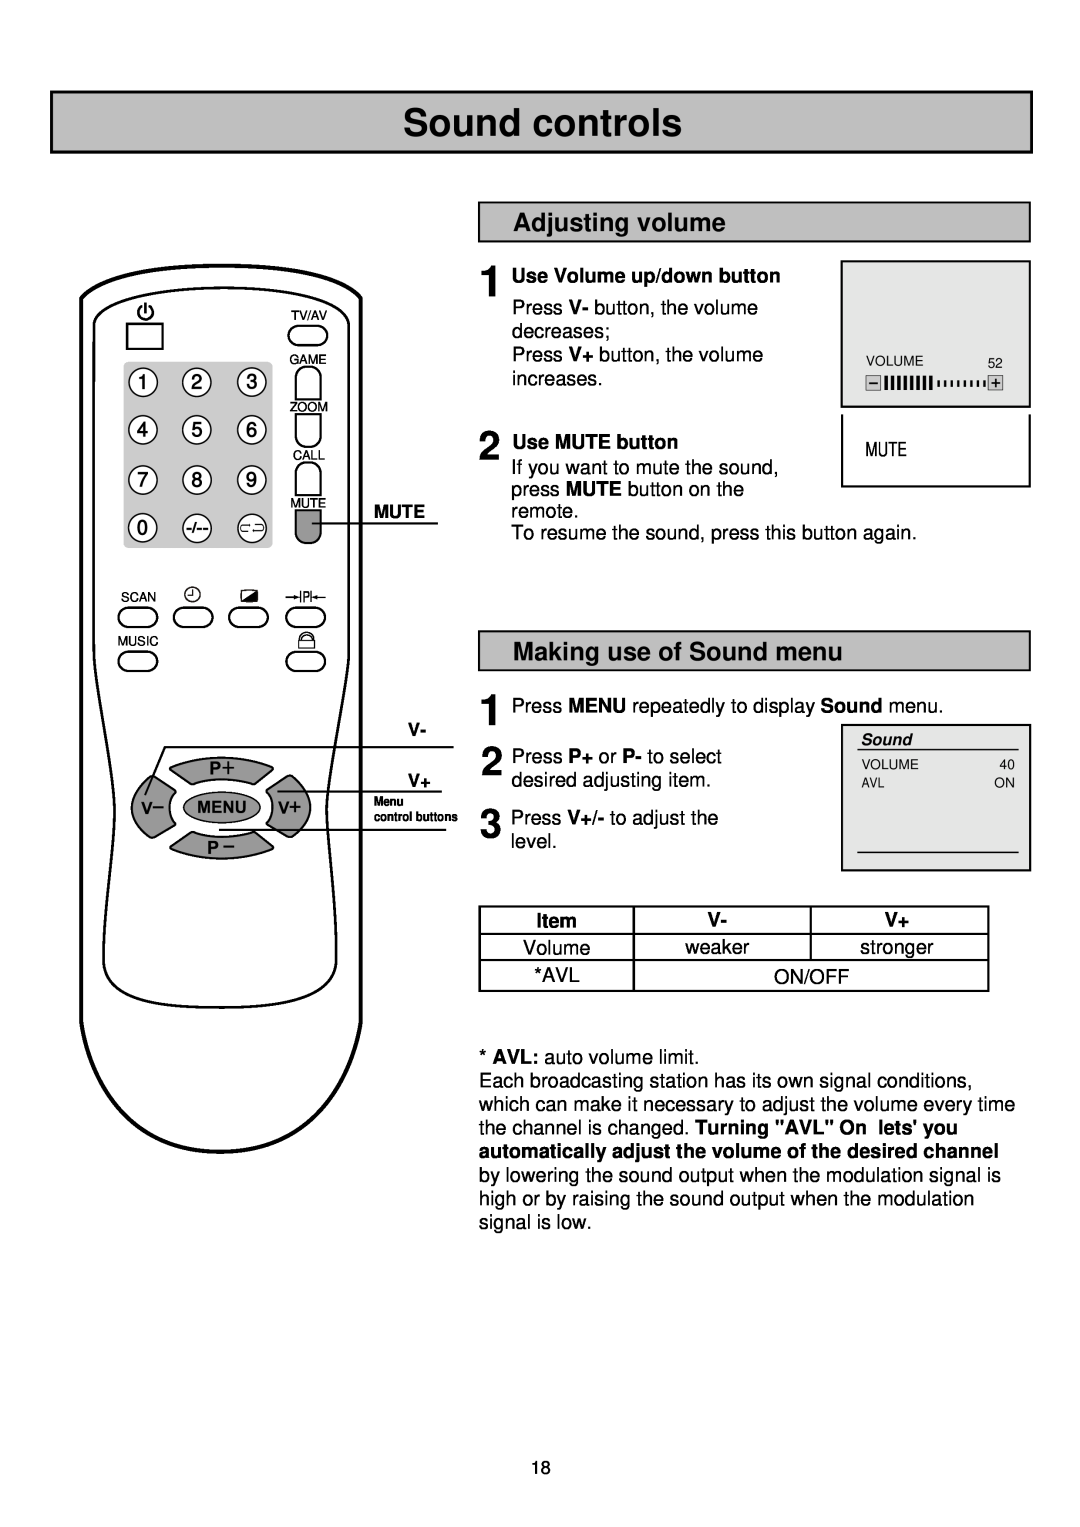 Palsonic 6835TK Sound controls, Adjusting volume, Making use of Sound menu, Use Volume up/down button, Use MUTE button 